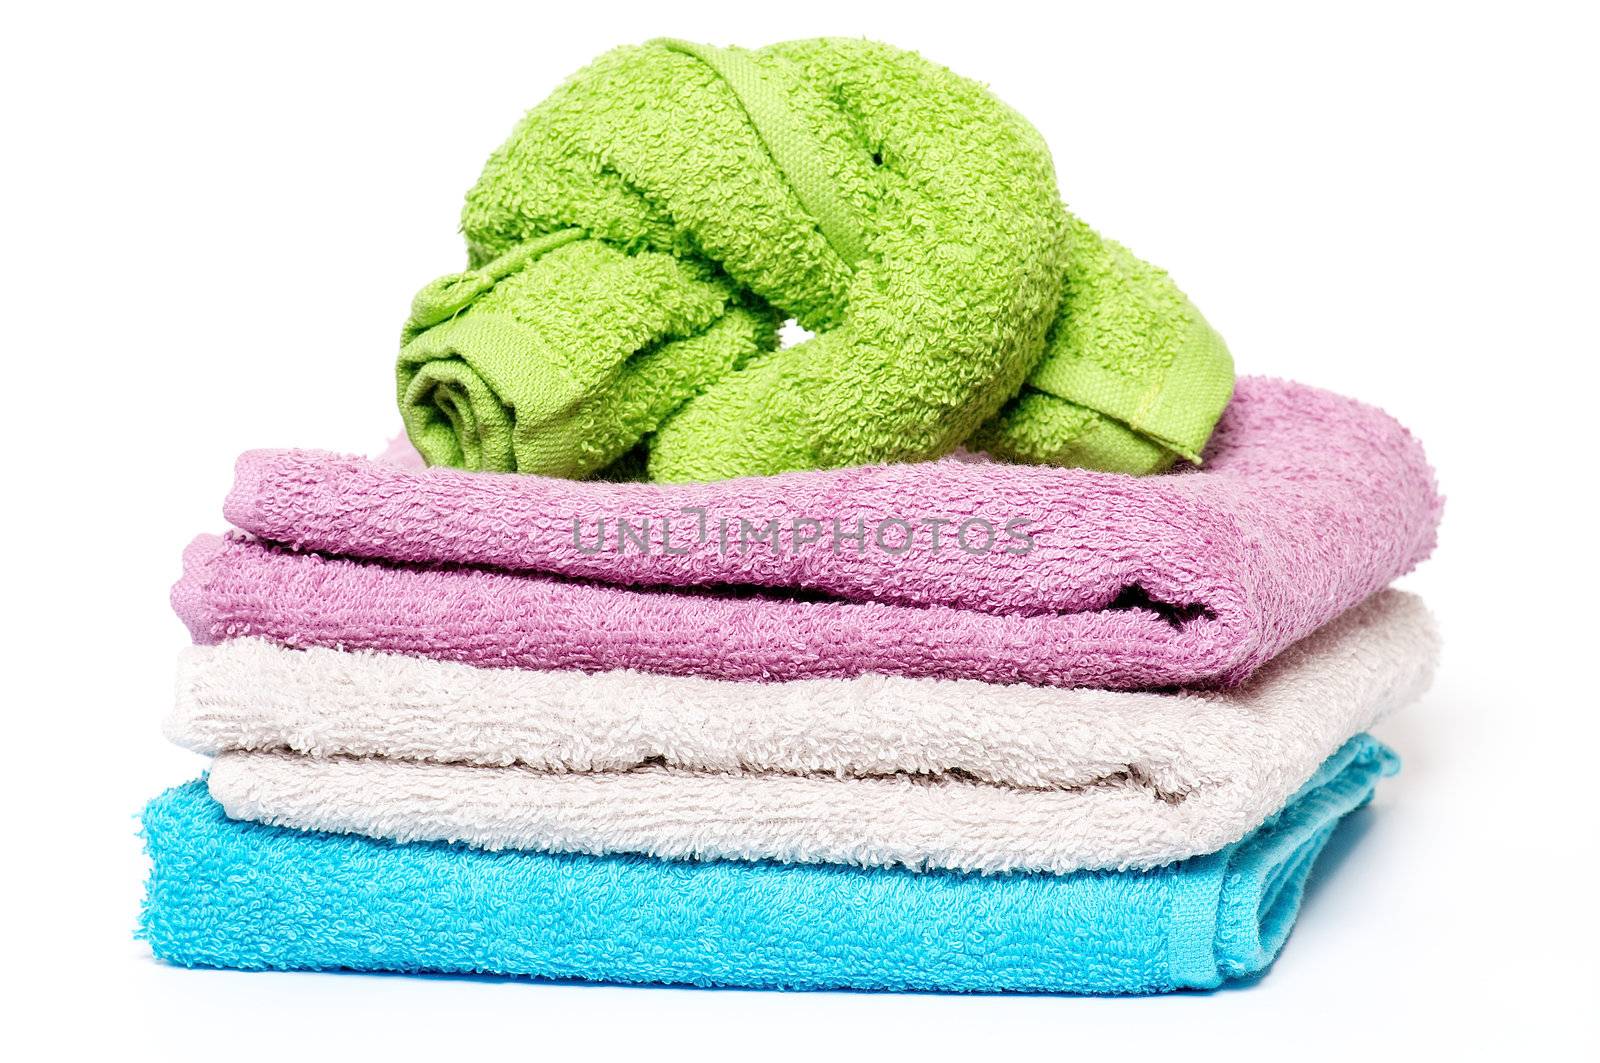 Multi-colored towels  by zhekos